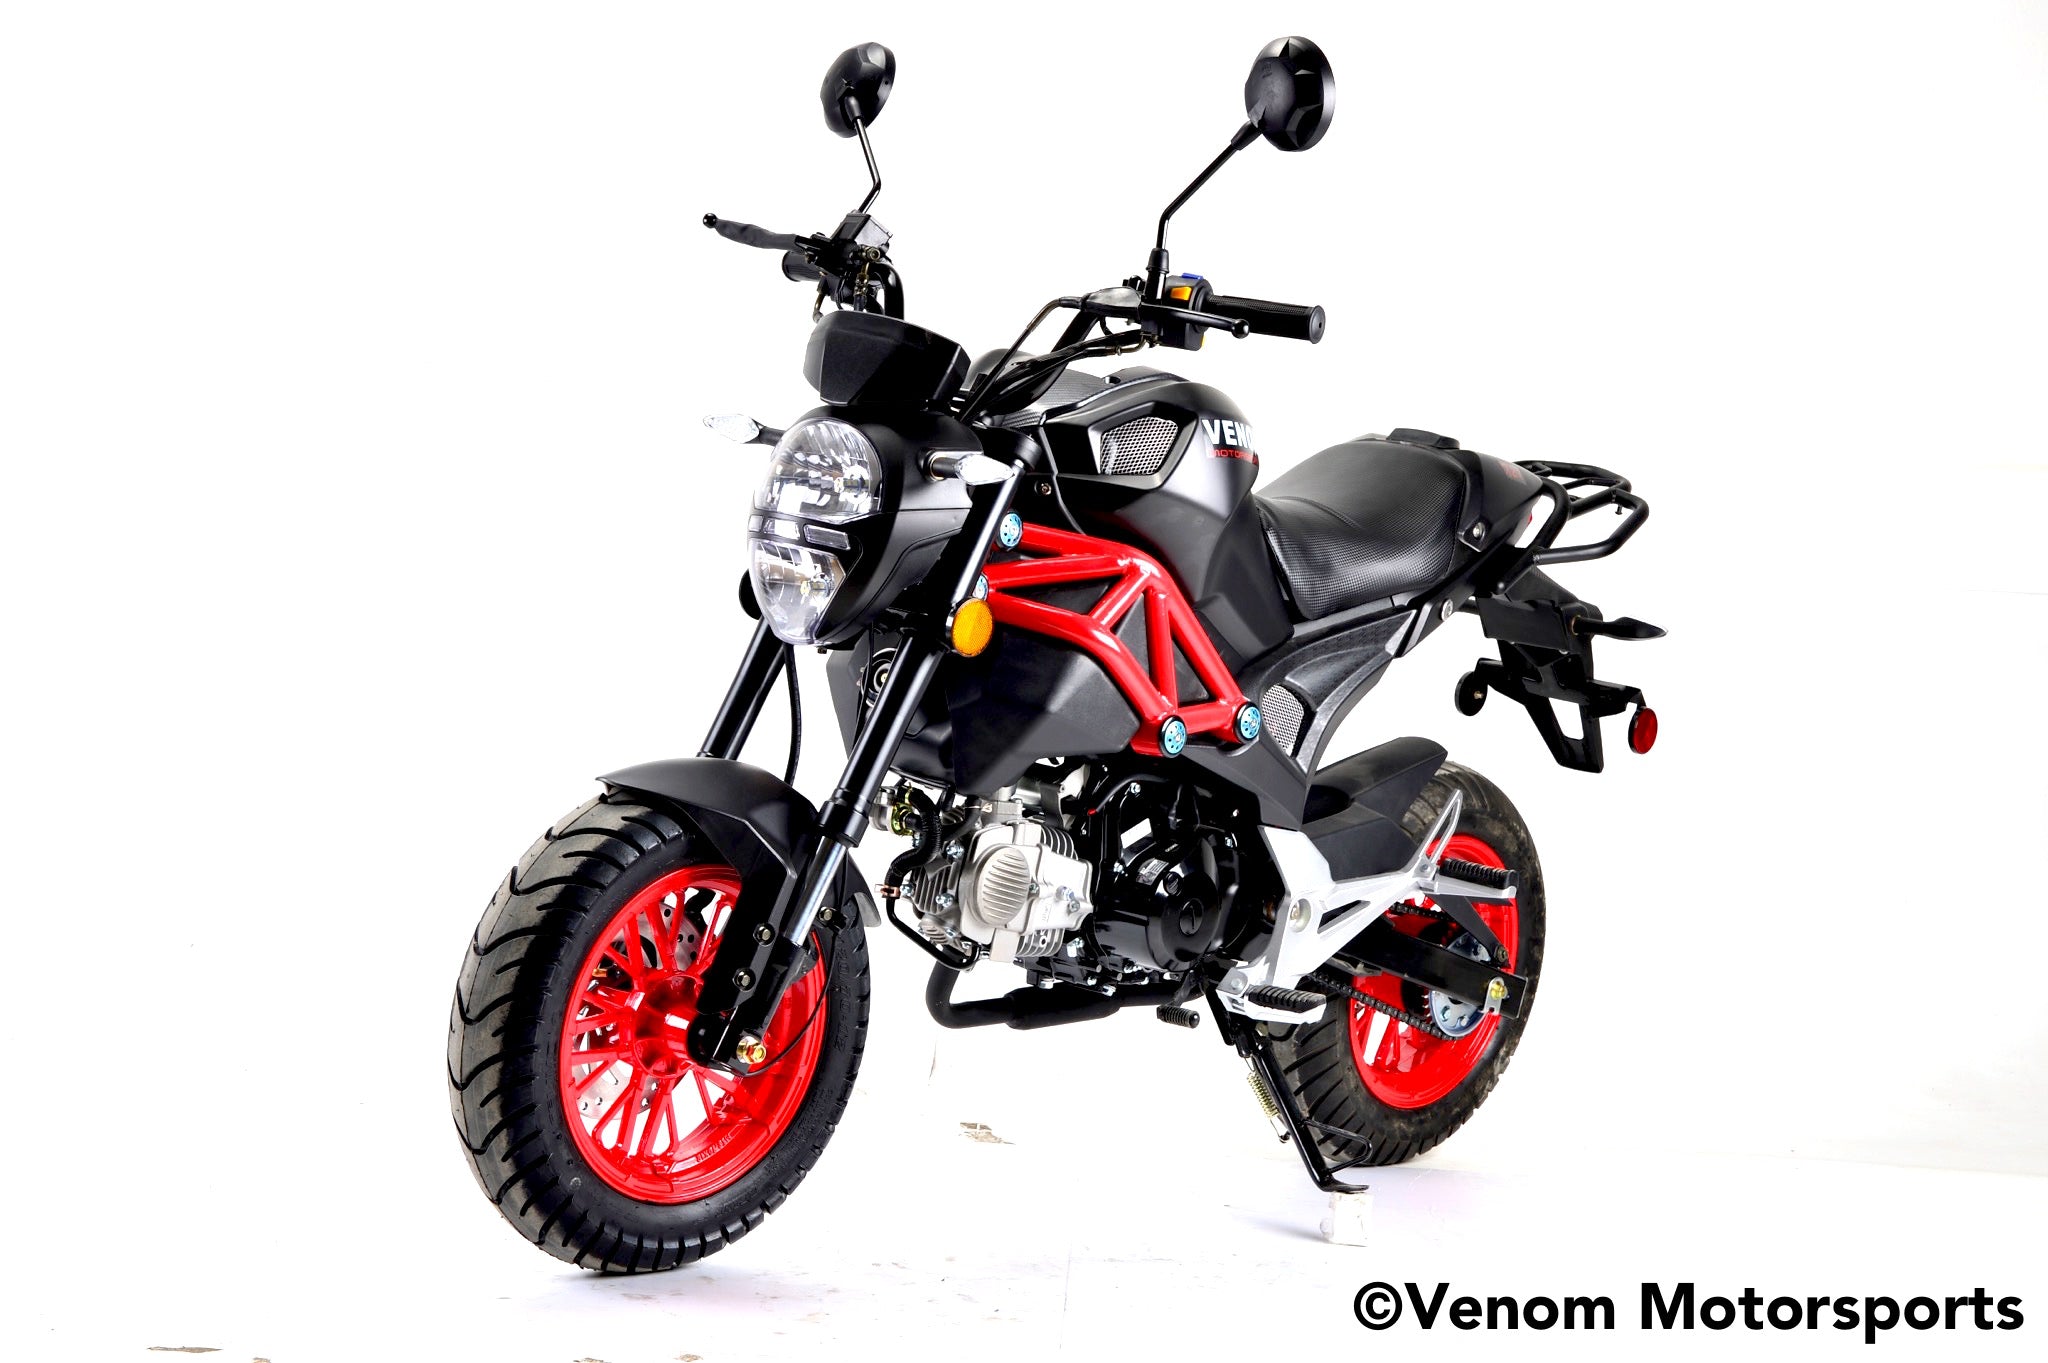 Venom x21, Automatic Motorcycle For Sale, 49cc Moped Scooter